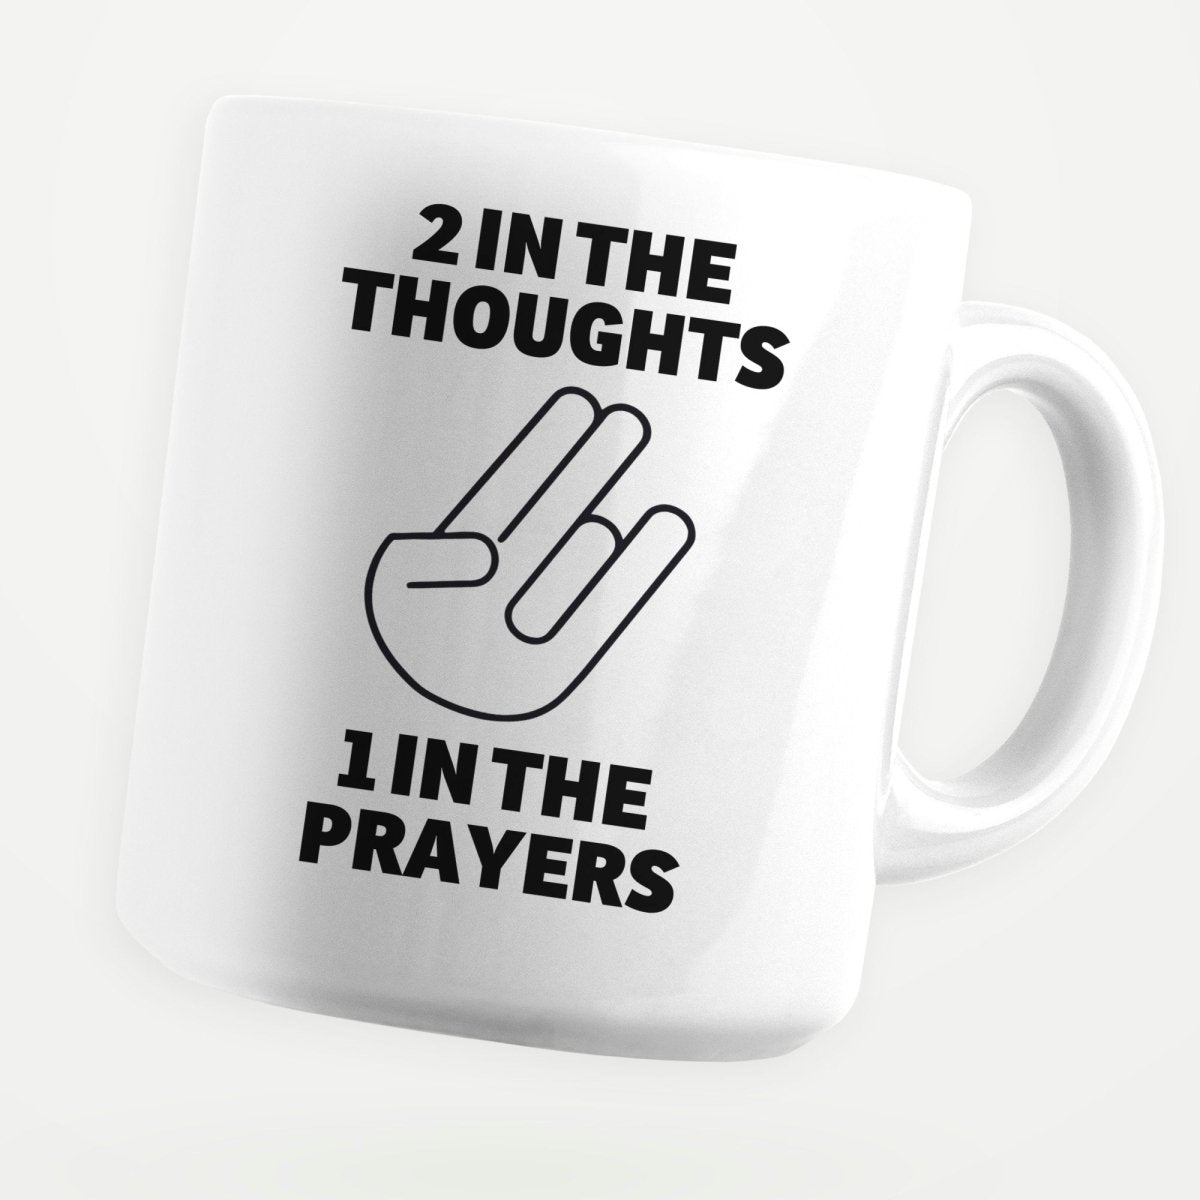 Two In The Though One In The Prayers 11oz Coffee Mug - stickerbullTwo In The Though One In The Prayers 11oz Coffee MugMugsstickerbullstickerbullMug_2InTheThoughtsTwo In The Though One In The Prayers 11oz Coffee Mug